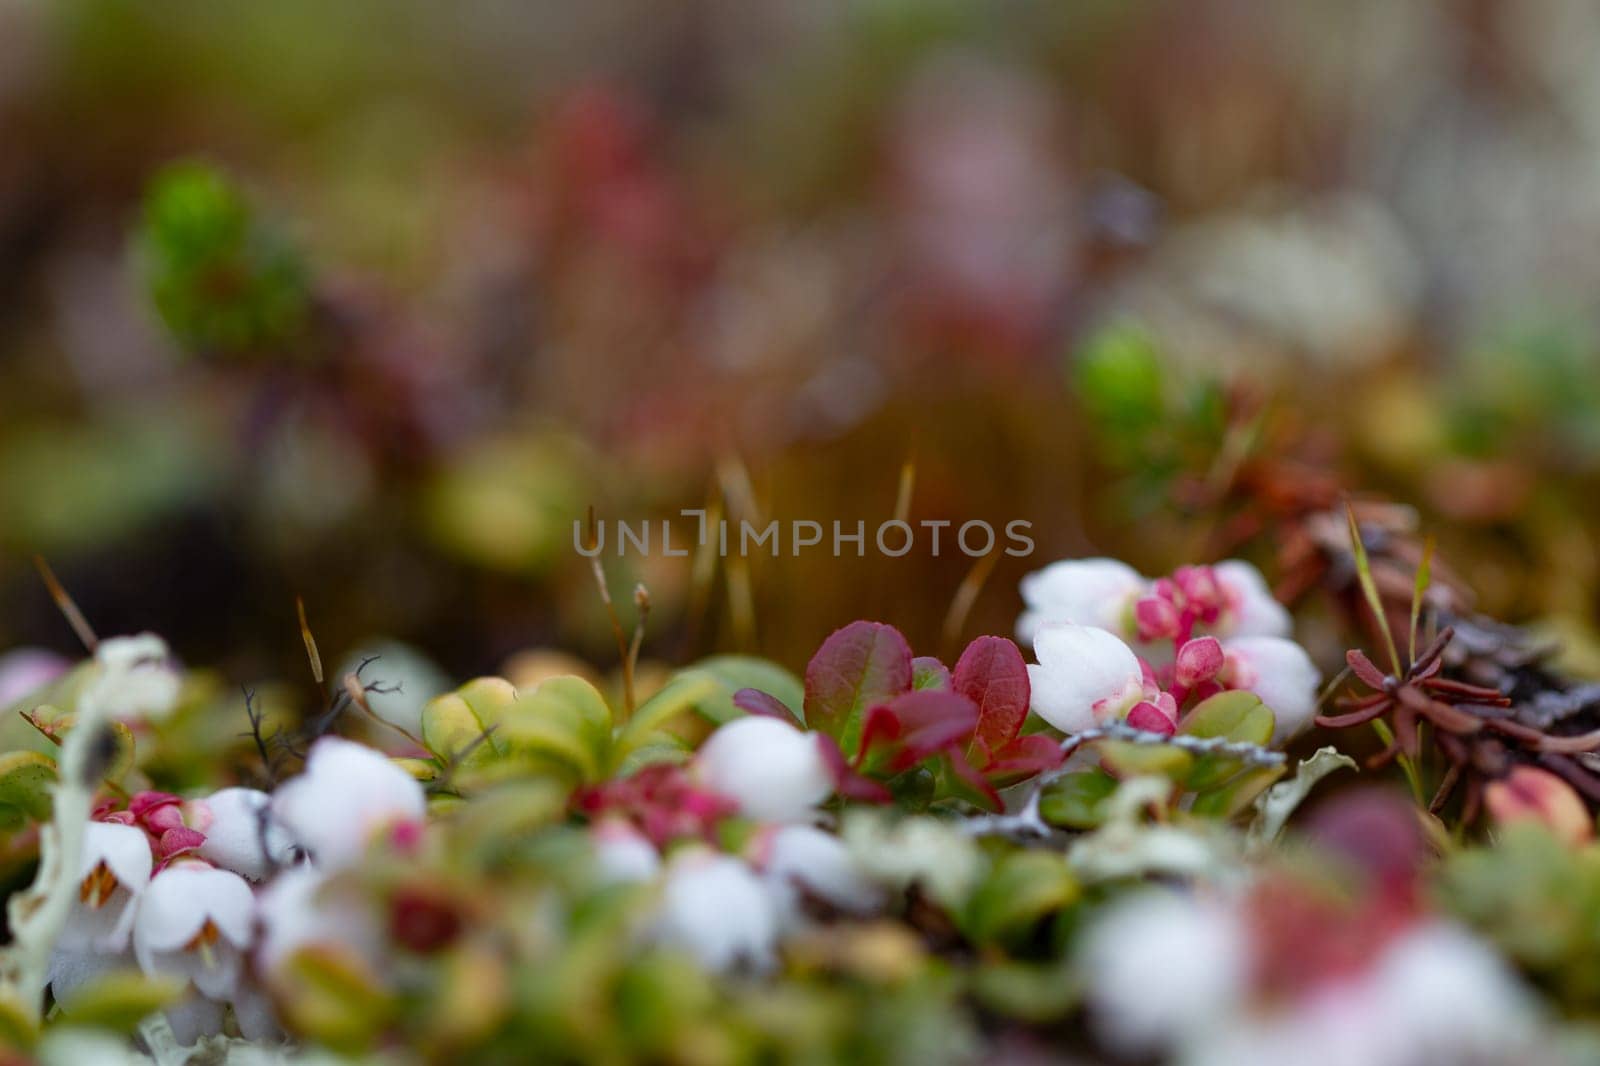 Flower of a lingonberry or cranberry found growing on the arctic tundra near Arviat, Nunavut, Canada by Granchinho